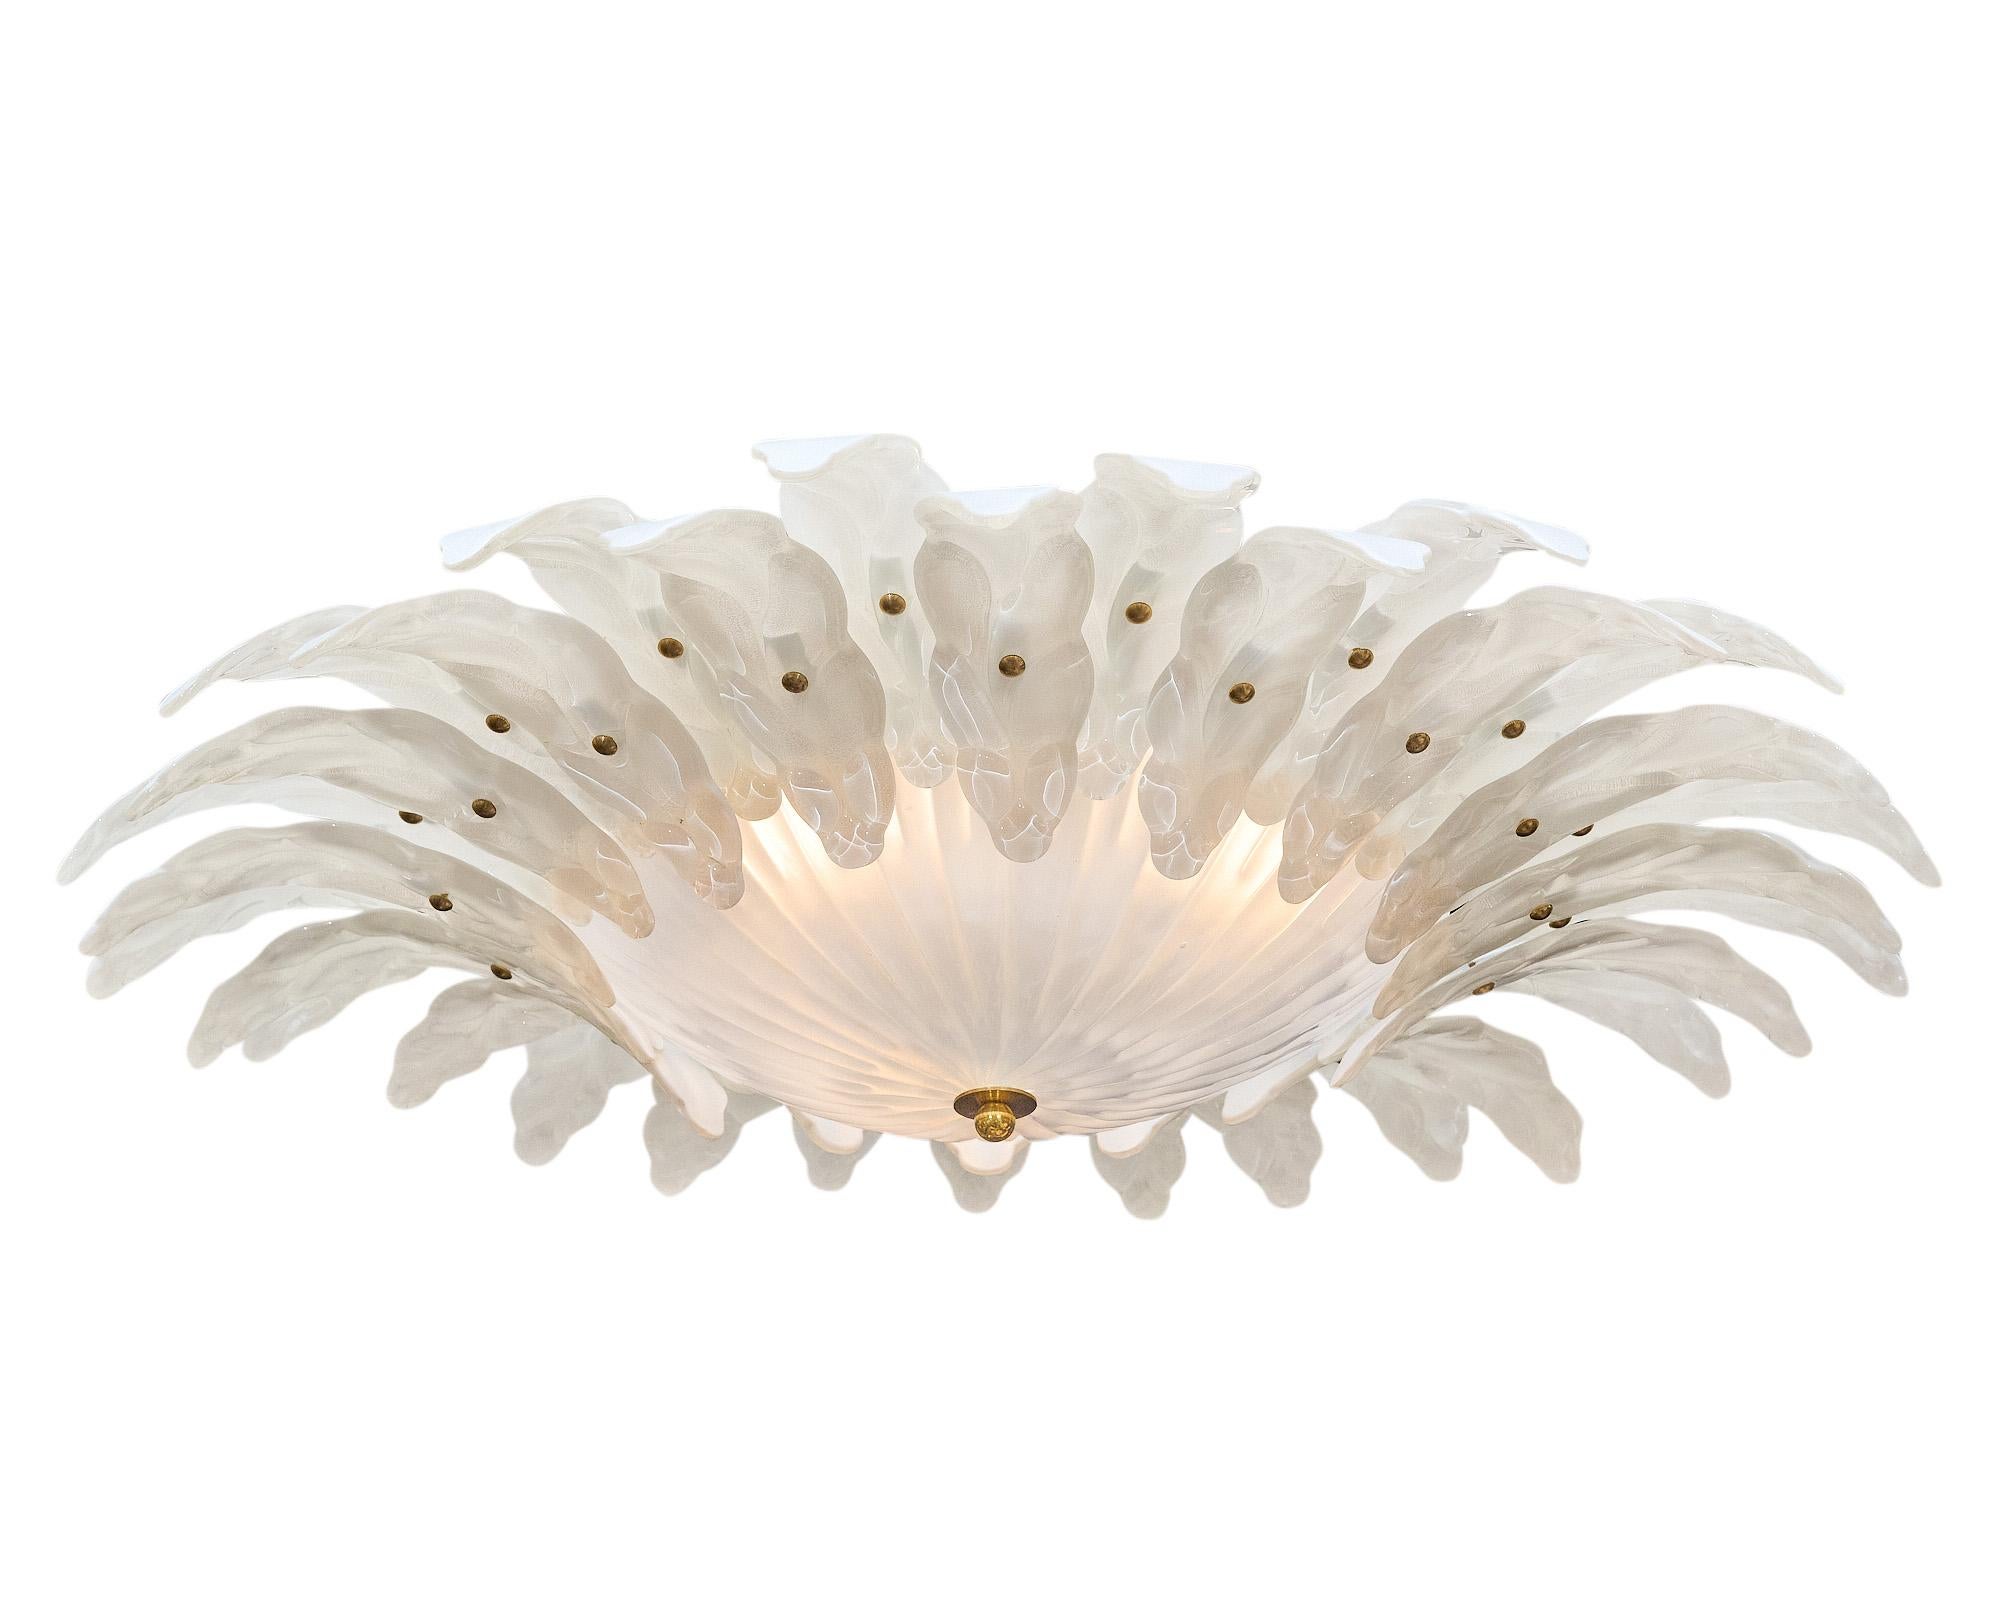 Flush mount fixture made of hand-blown glass elements. Each glass petal circles a central hand-blown glass cup. We love the frosted glass and the stamped details on each. This has been newly wired to fit US standards.

The current height from